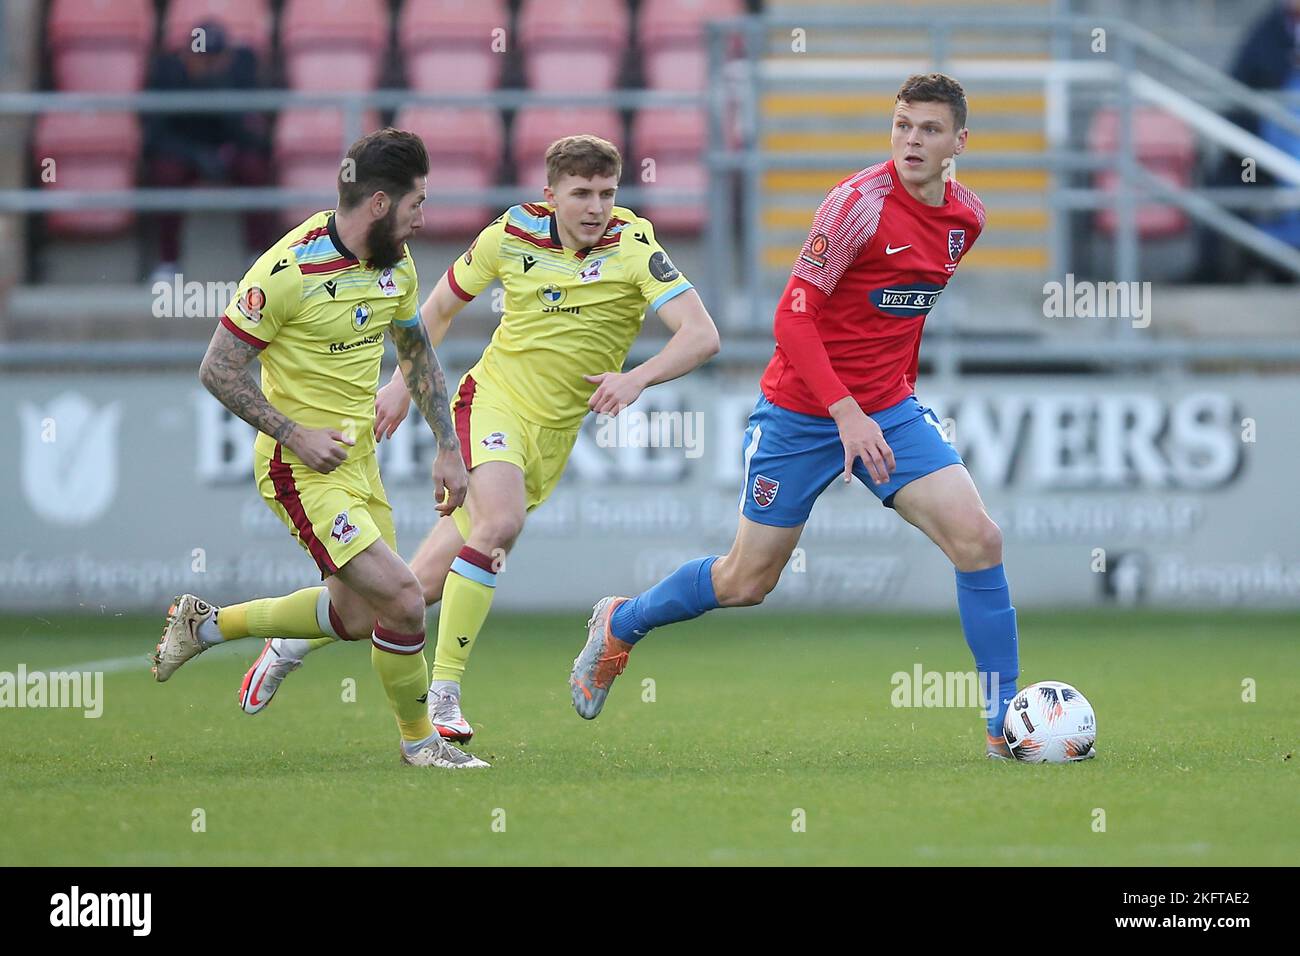 Matt Robinson of Dagenham and Redbridge and Jacob Butterfield of Scunthorpe United during Dagenham & Redbridge vs Scunthorpe United, Vanarama National Stock Photo